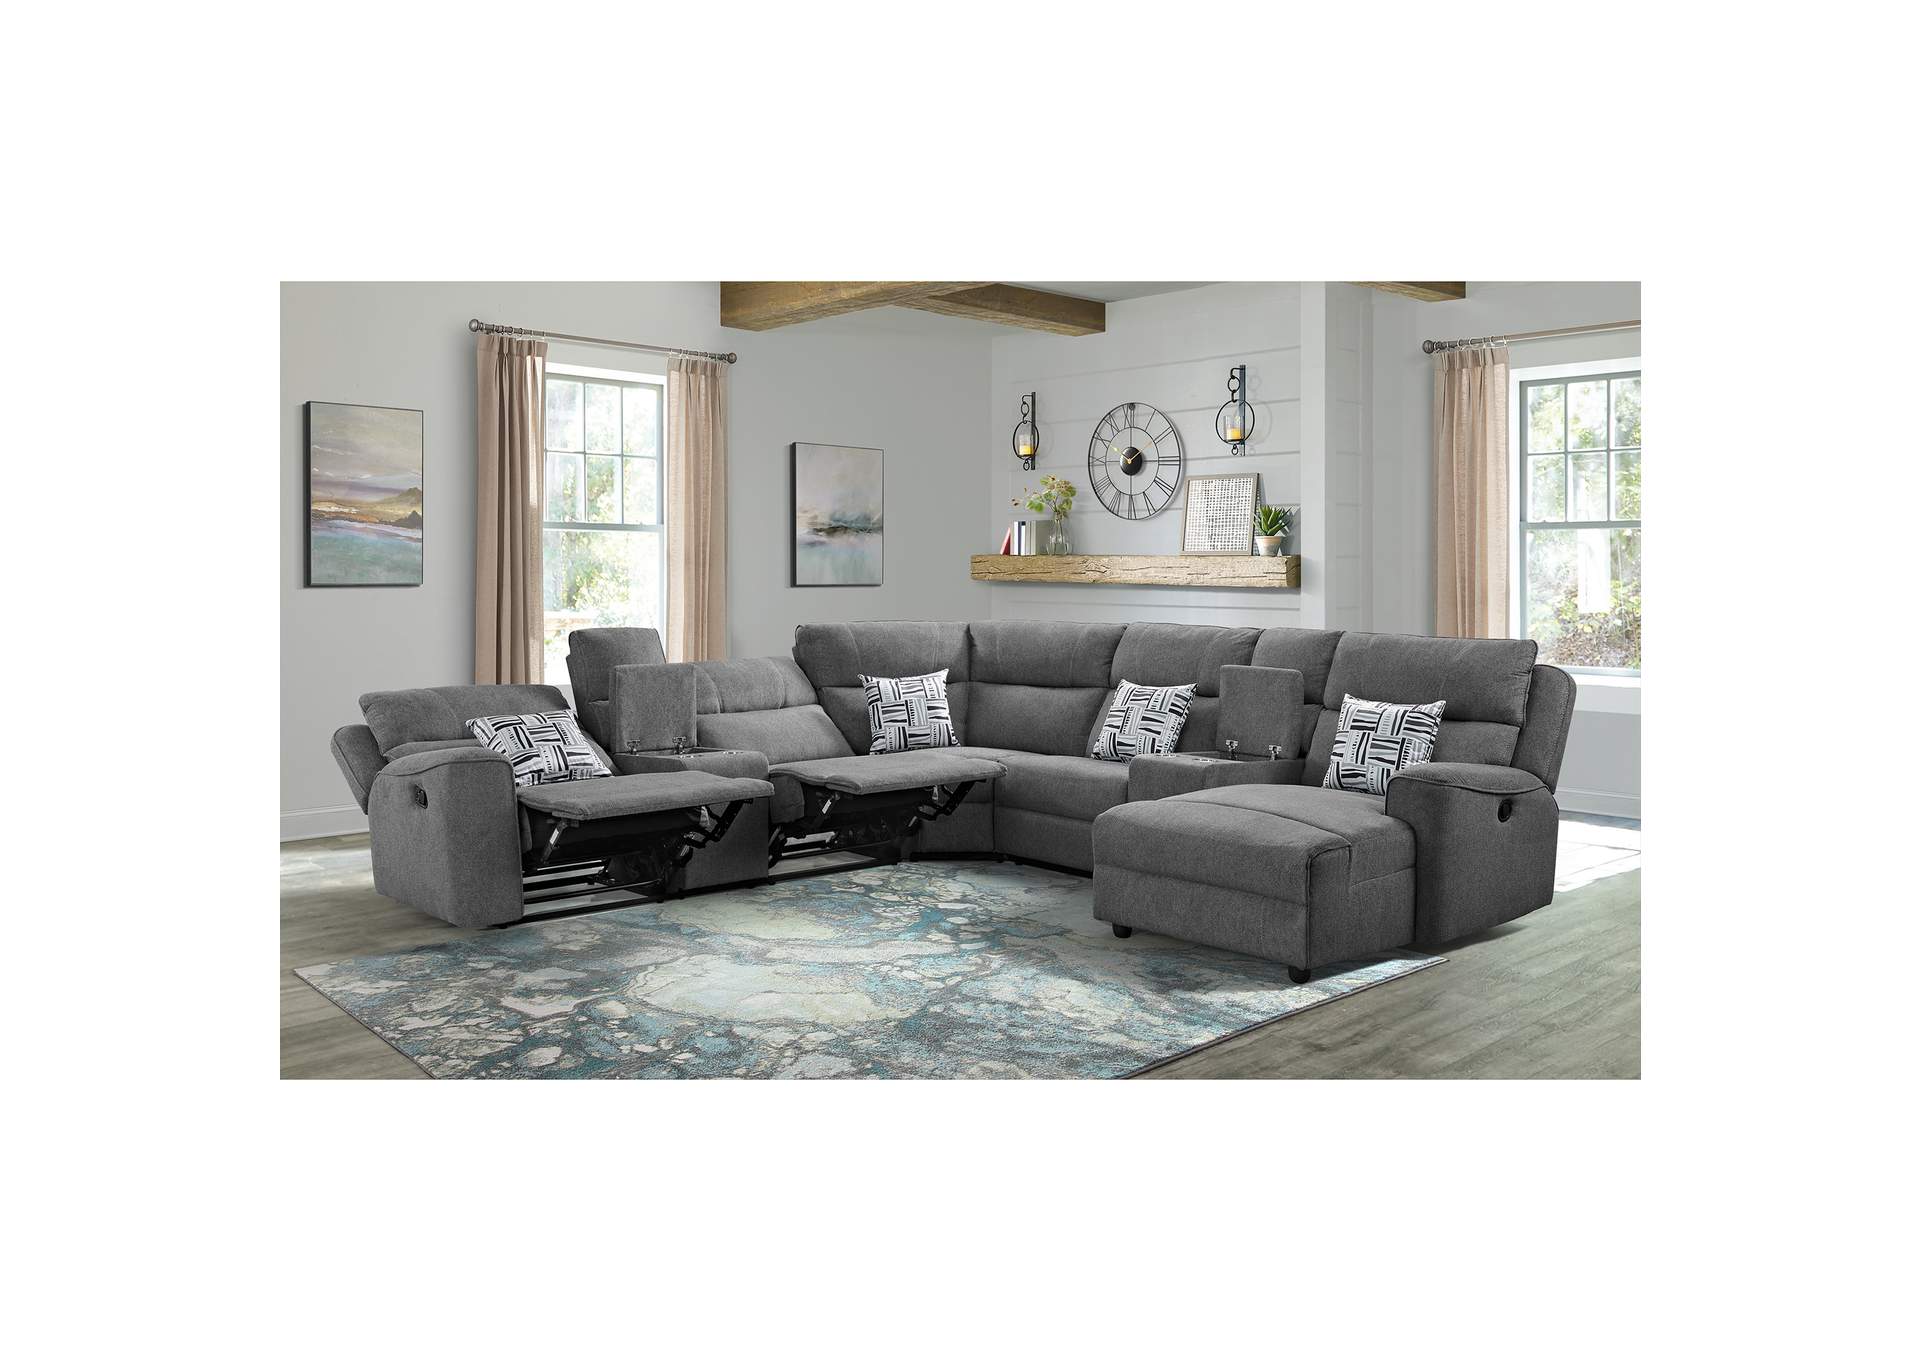 Connery Sectional Power Motion Right Hand Facingreclining Chaise With Power Headrest And 1 Pillow In Pewter,Elements